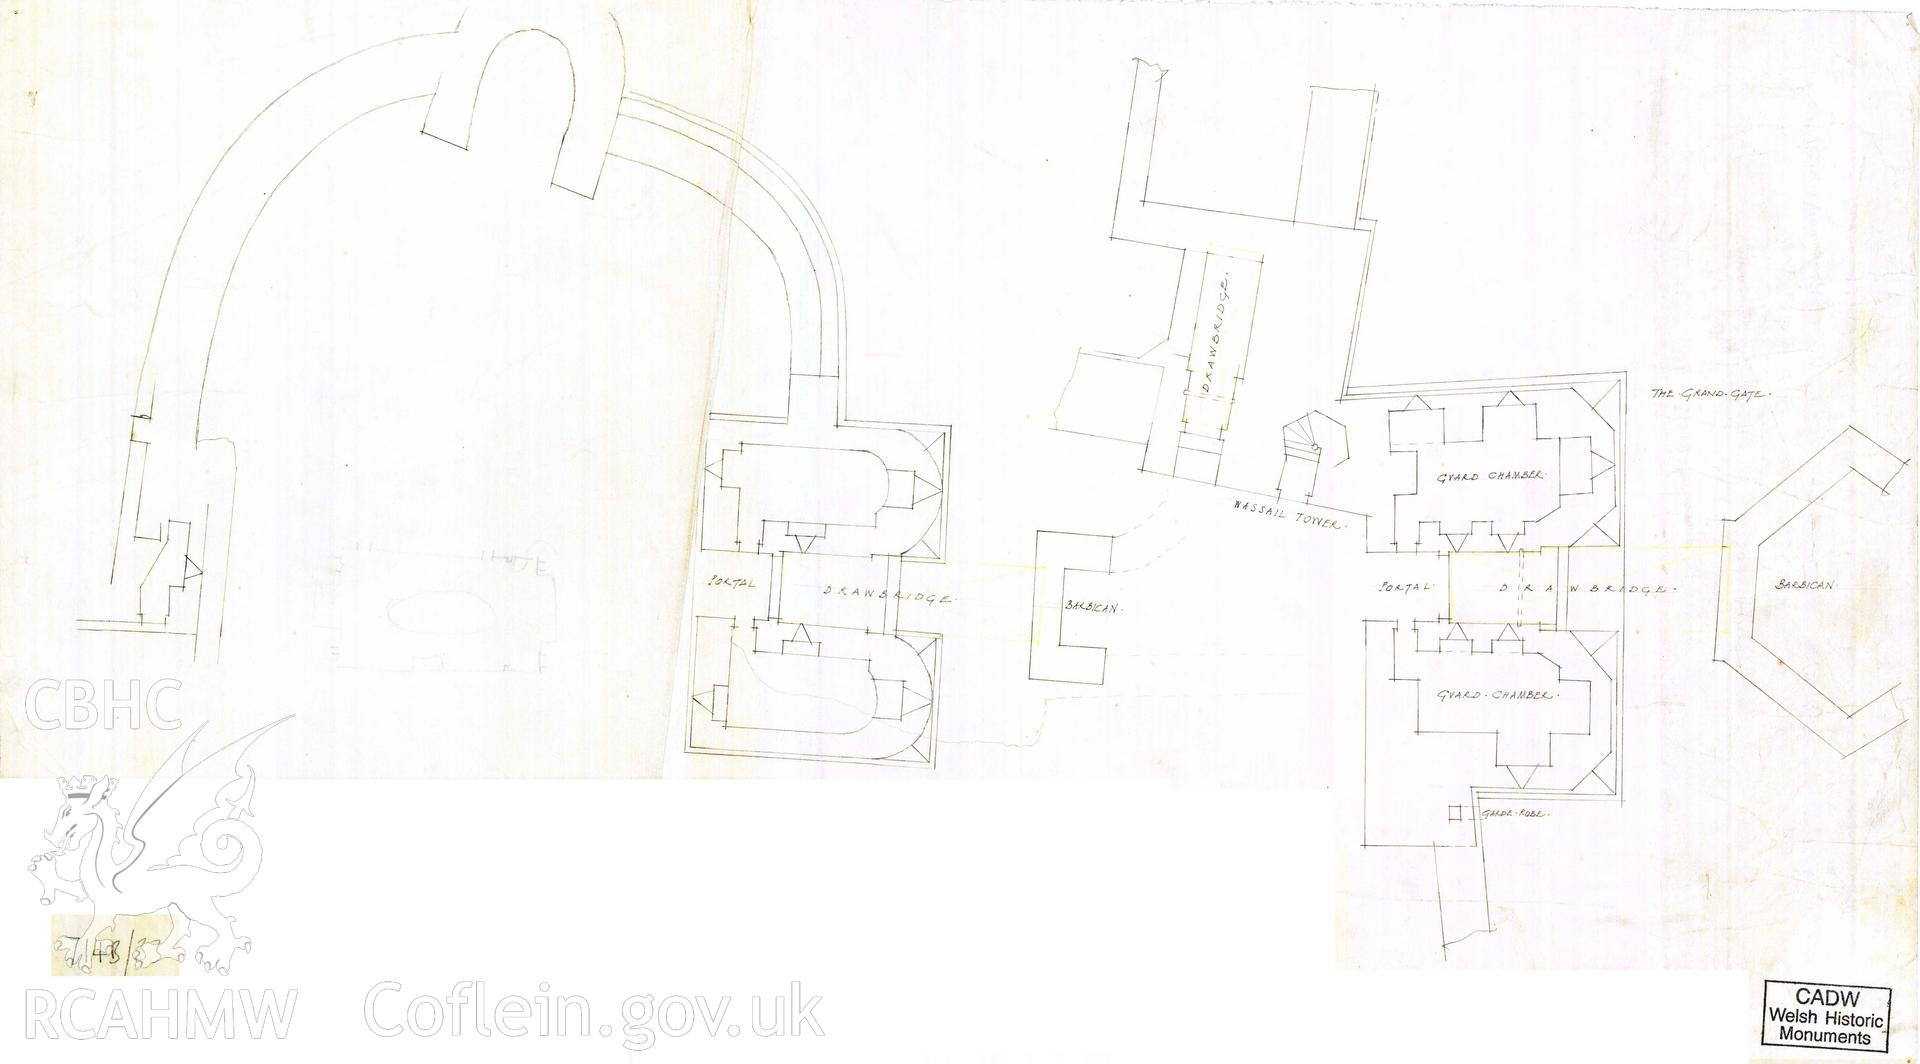 Cadw guardianship monument drawing of Caerphilly Castle. Outer E gate, E + S gates, plans. Cadw ref. no: 714B/33. Scale 1:[48].